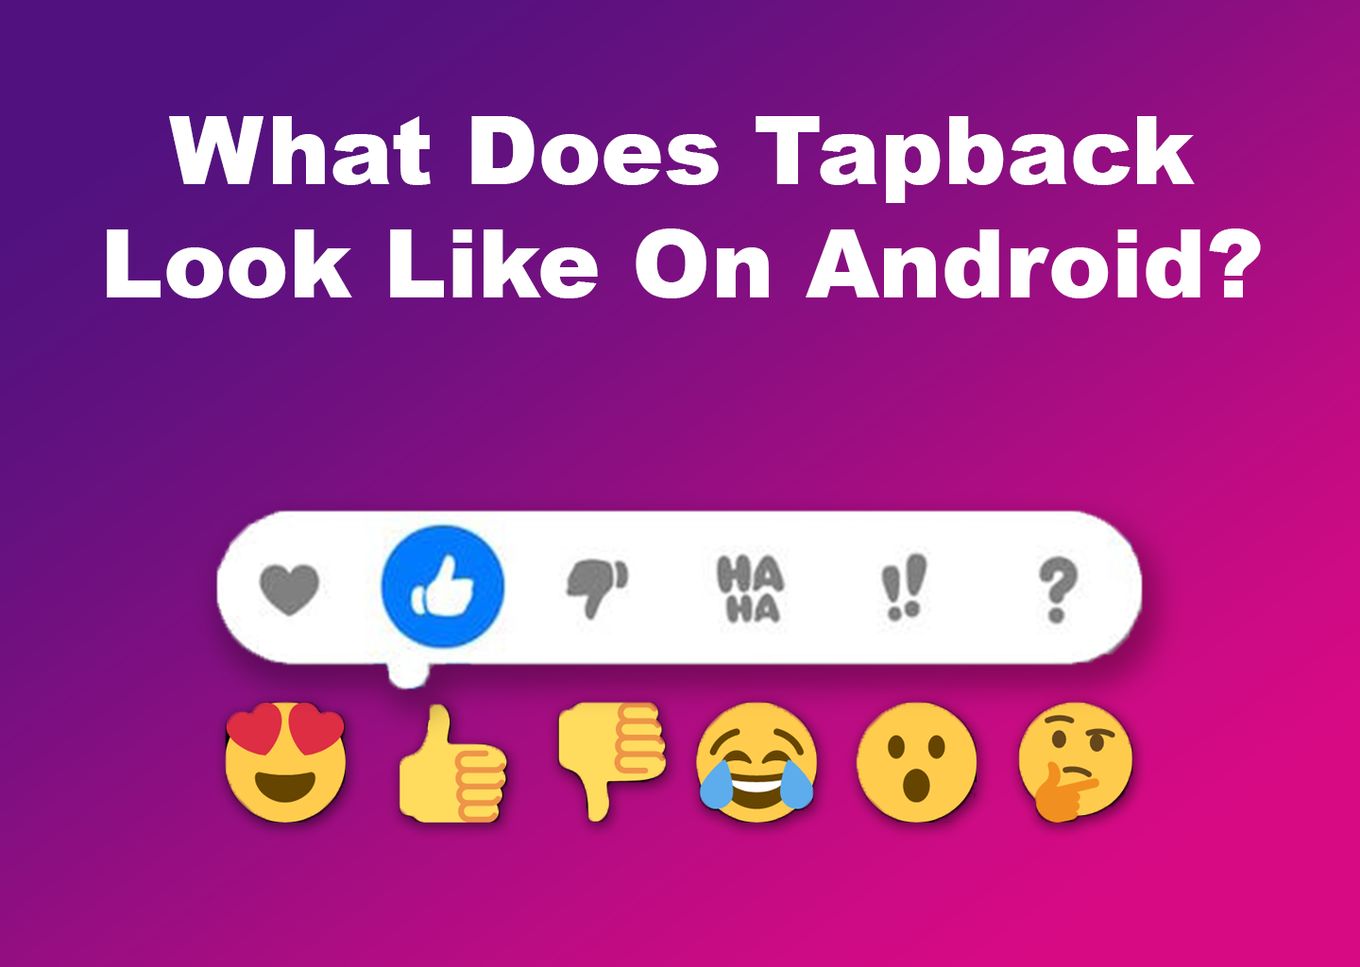 What Does Tapback Look Like On Android